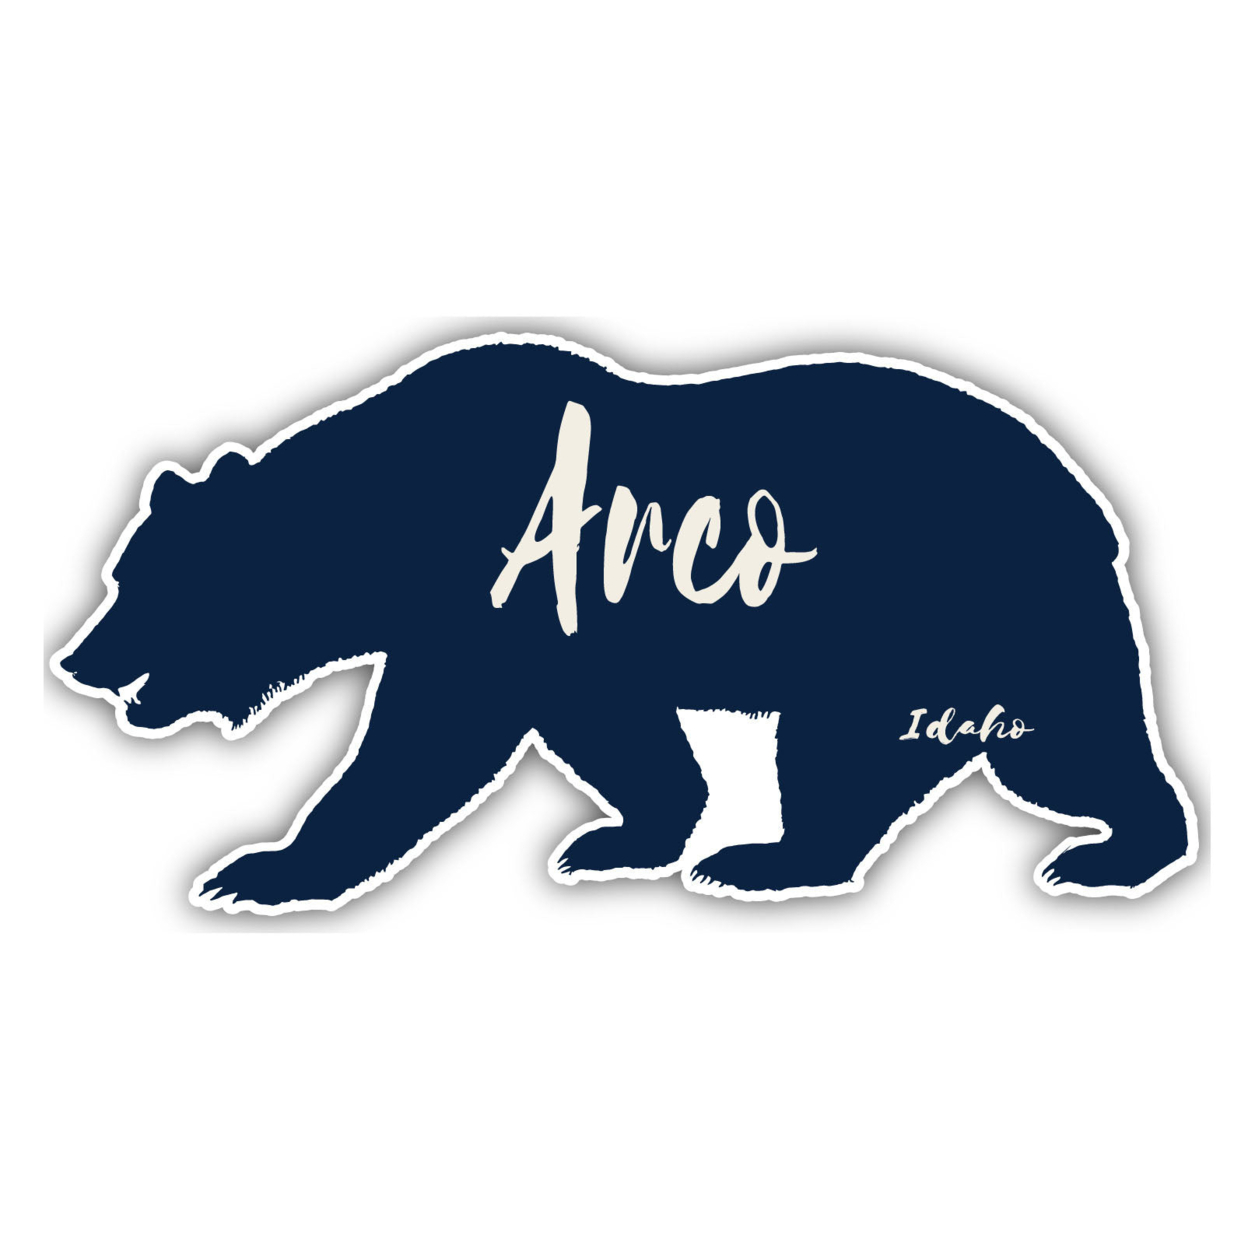 Arco Idaho Souvenir Decorative Stickers (Choose Theme And Size) - Single Unit, 12-Inch, Great Outdoors